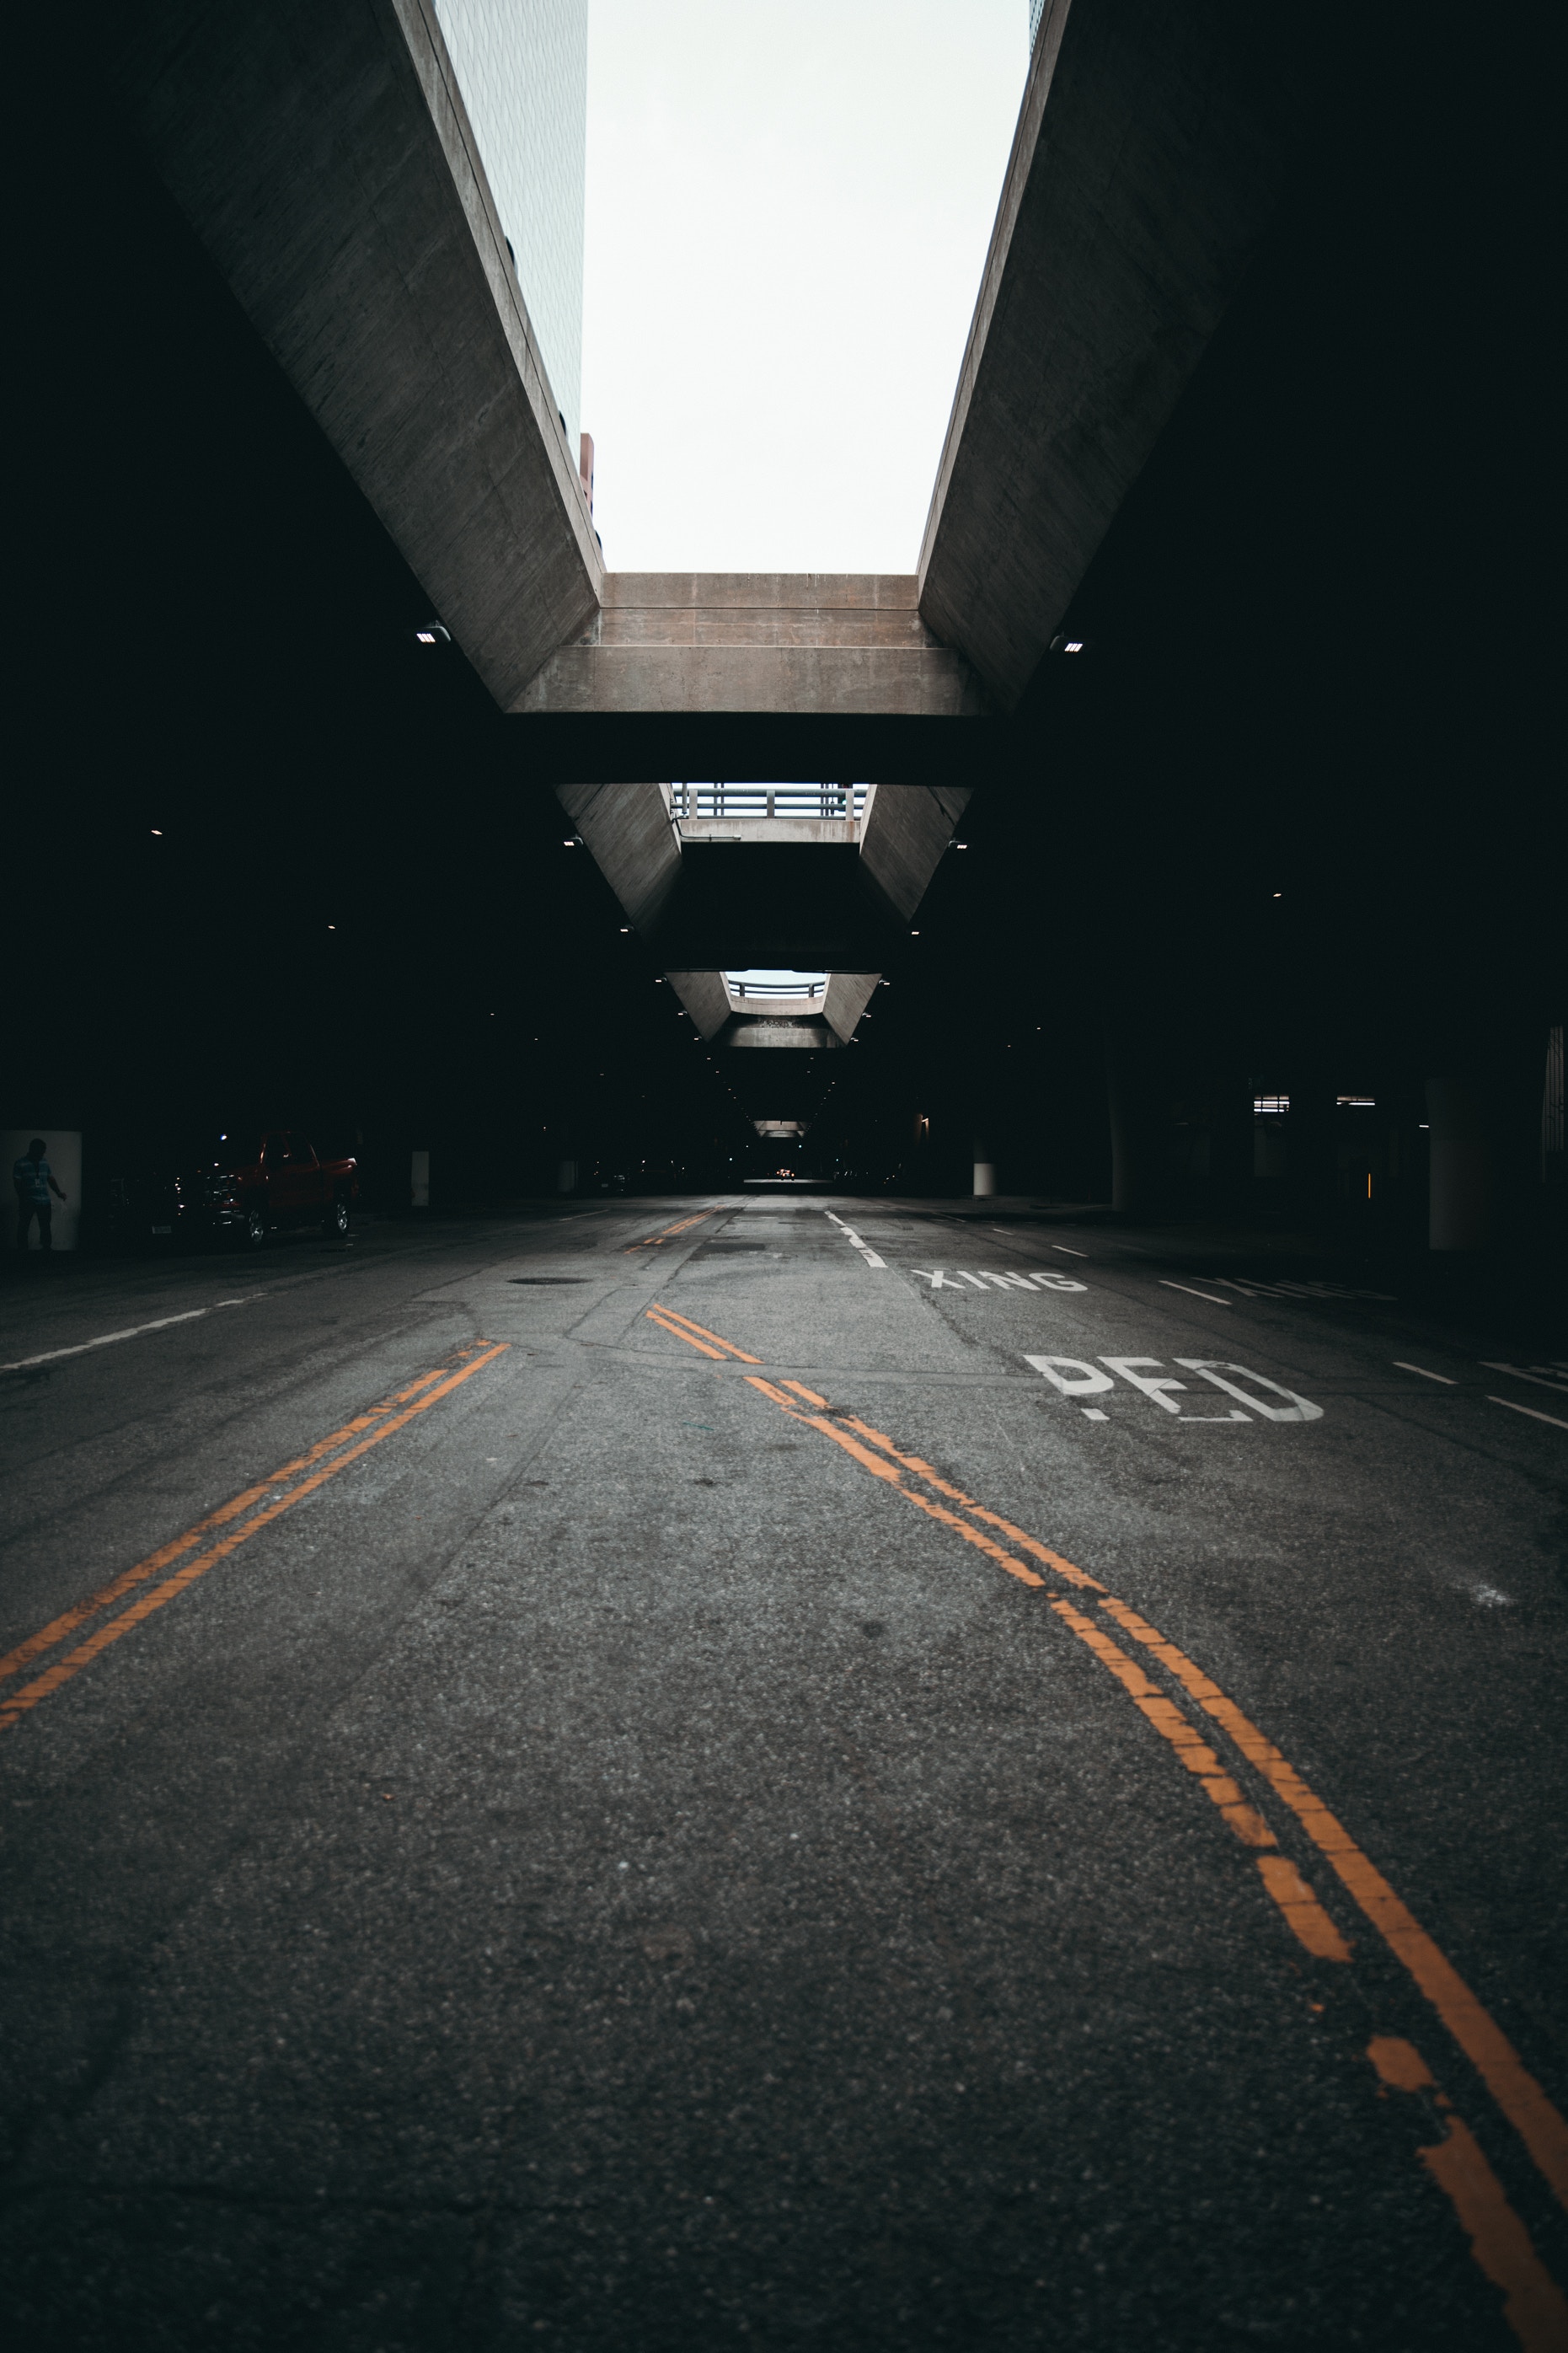 asphalt, cities, architecture, design, construction, parking, road markings, shed, canopy iphone wallpaper